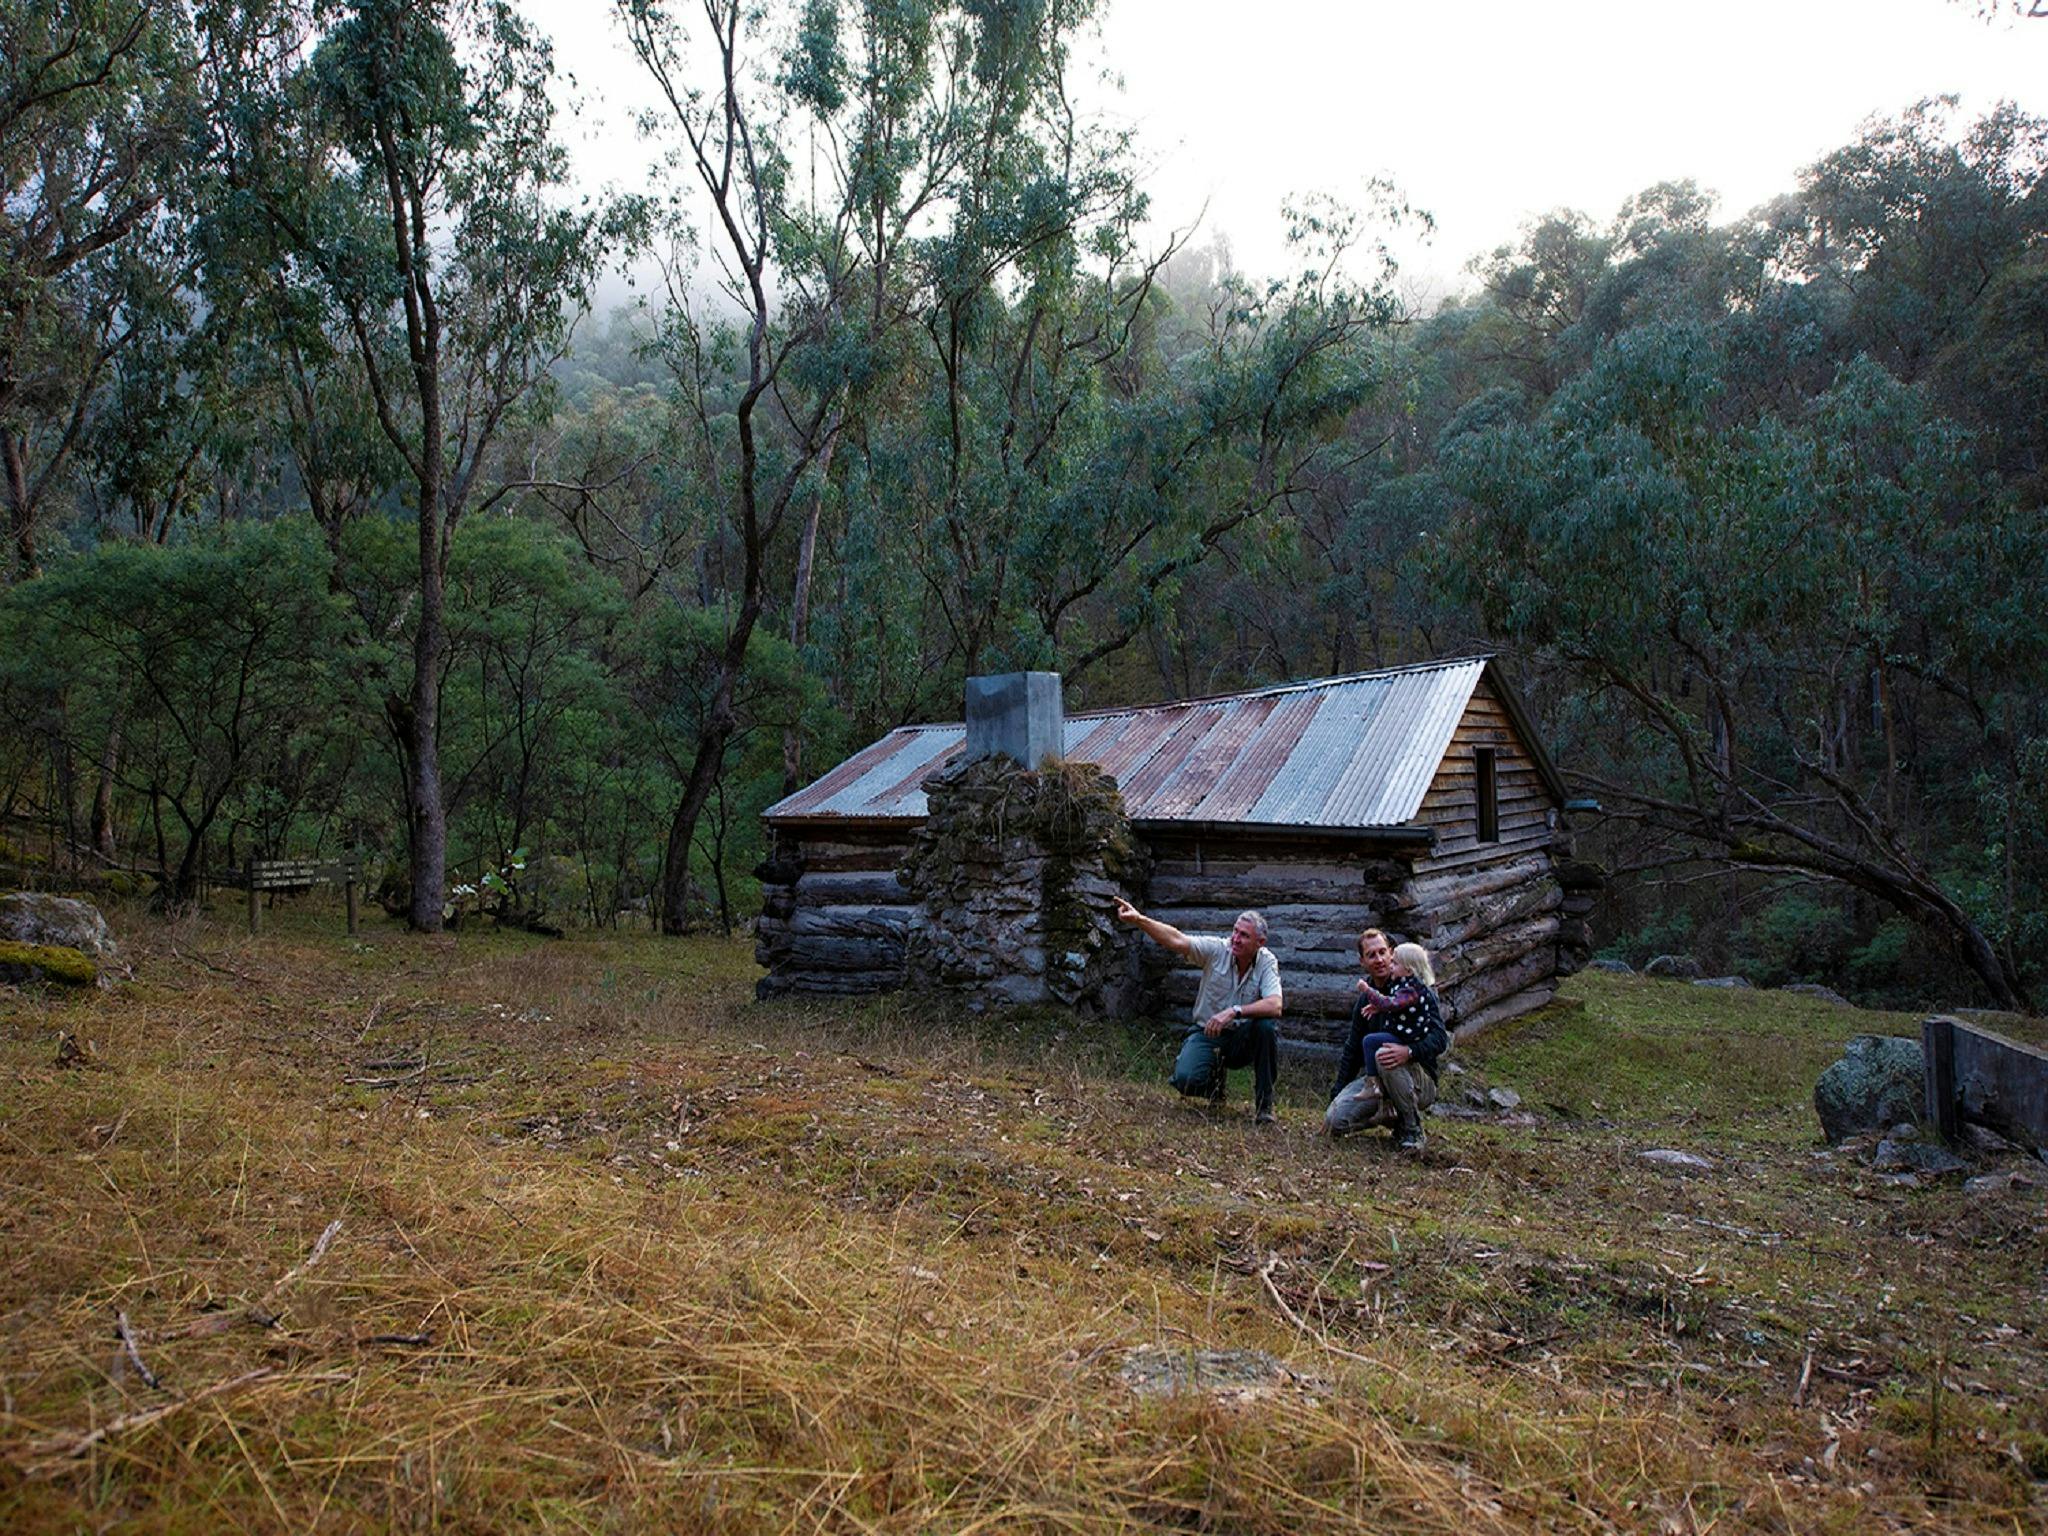 Visitors enjoying the Scout Hut after a short walk from Cotton Tree Creek, Mount Granya State Hut